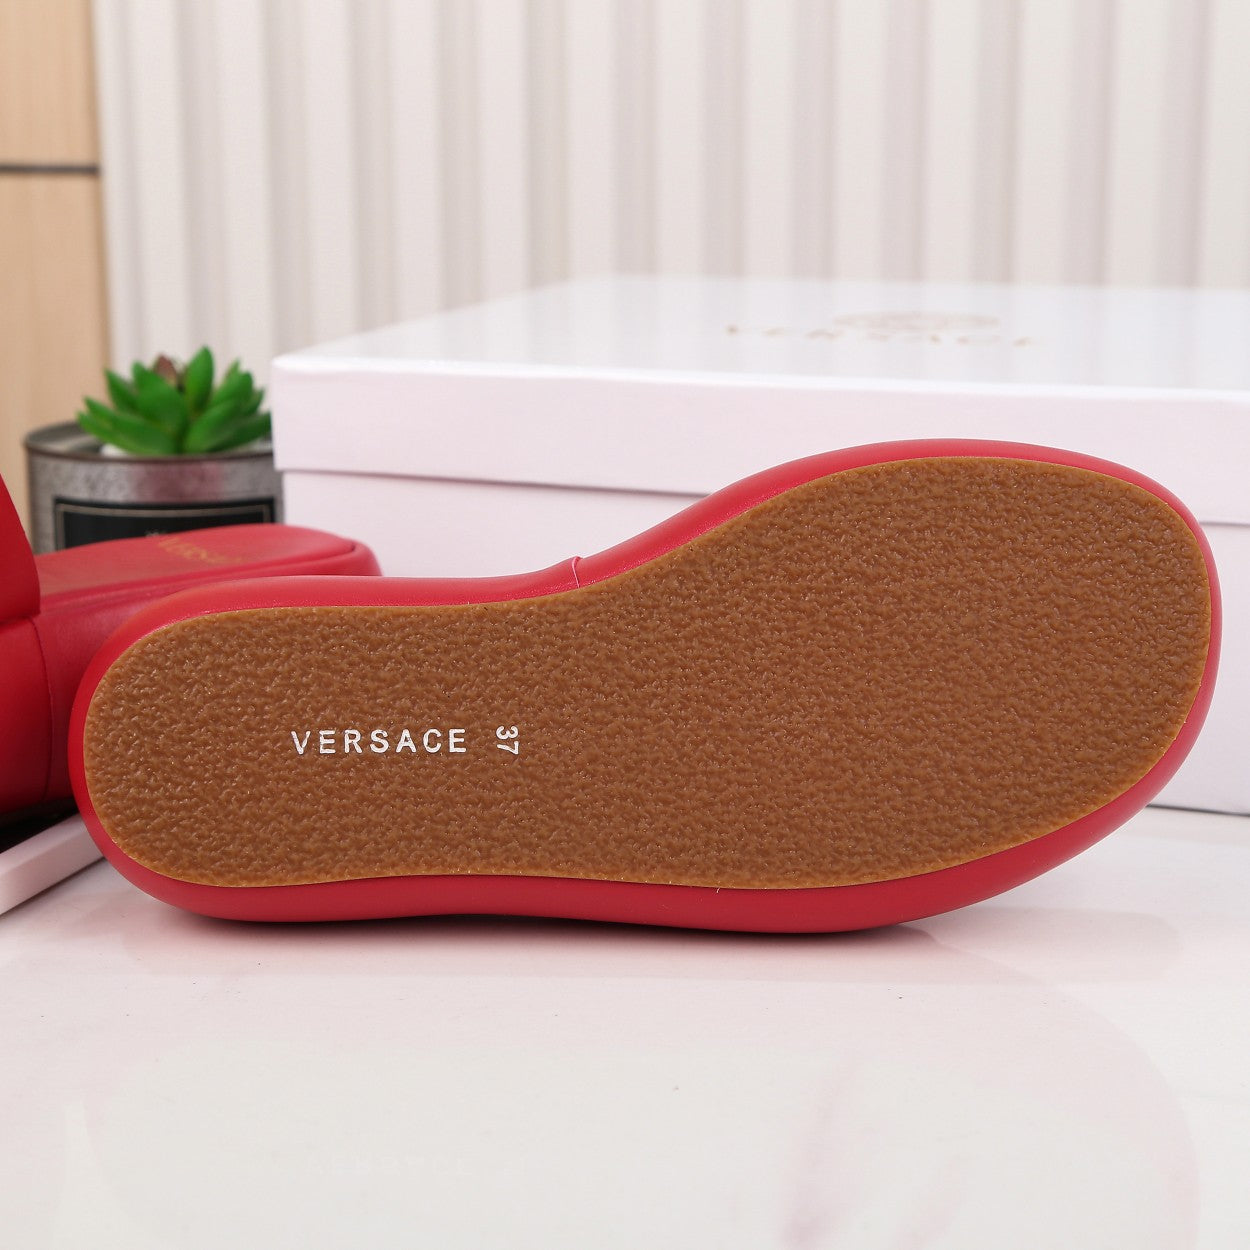 VRC  Slippers  6 Color's